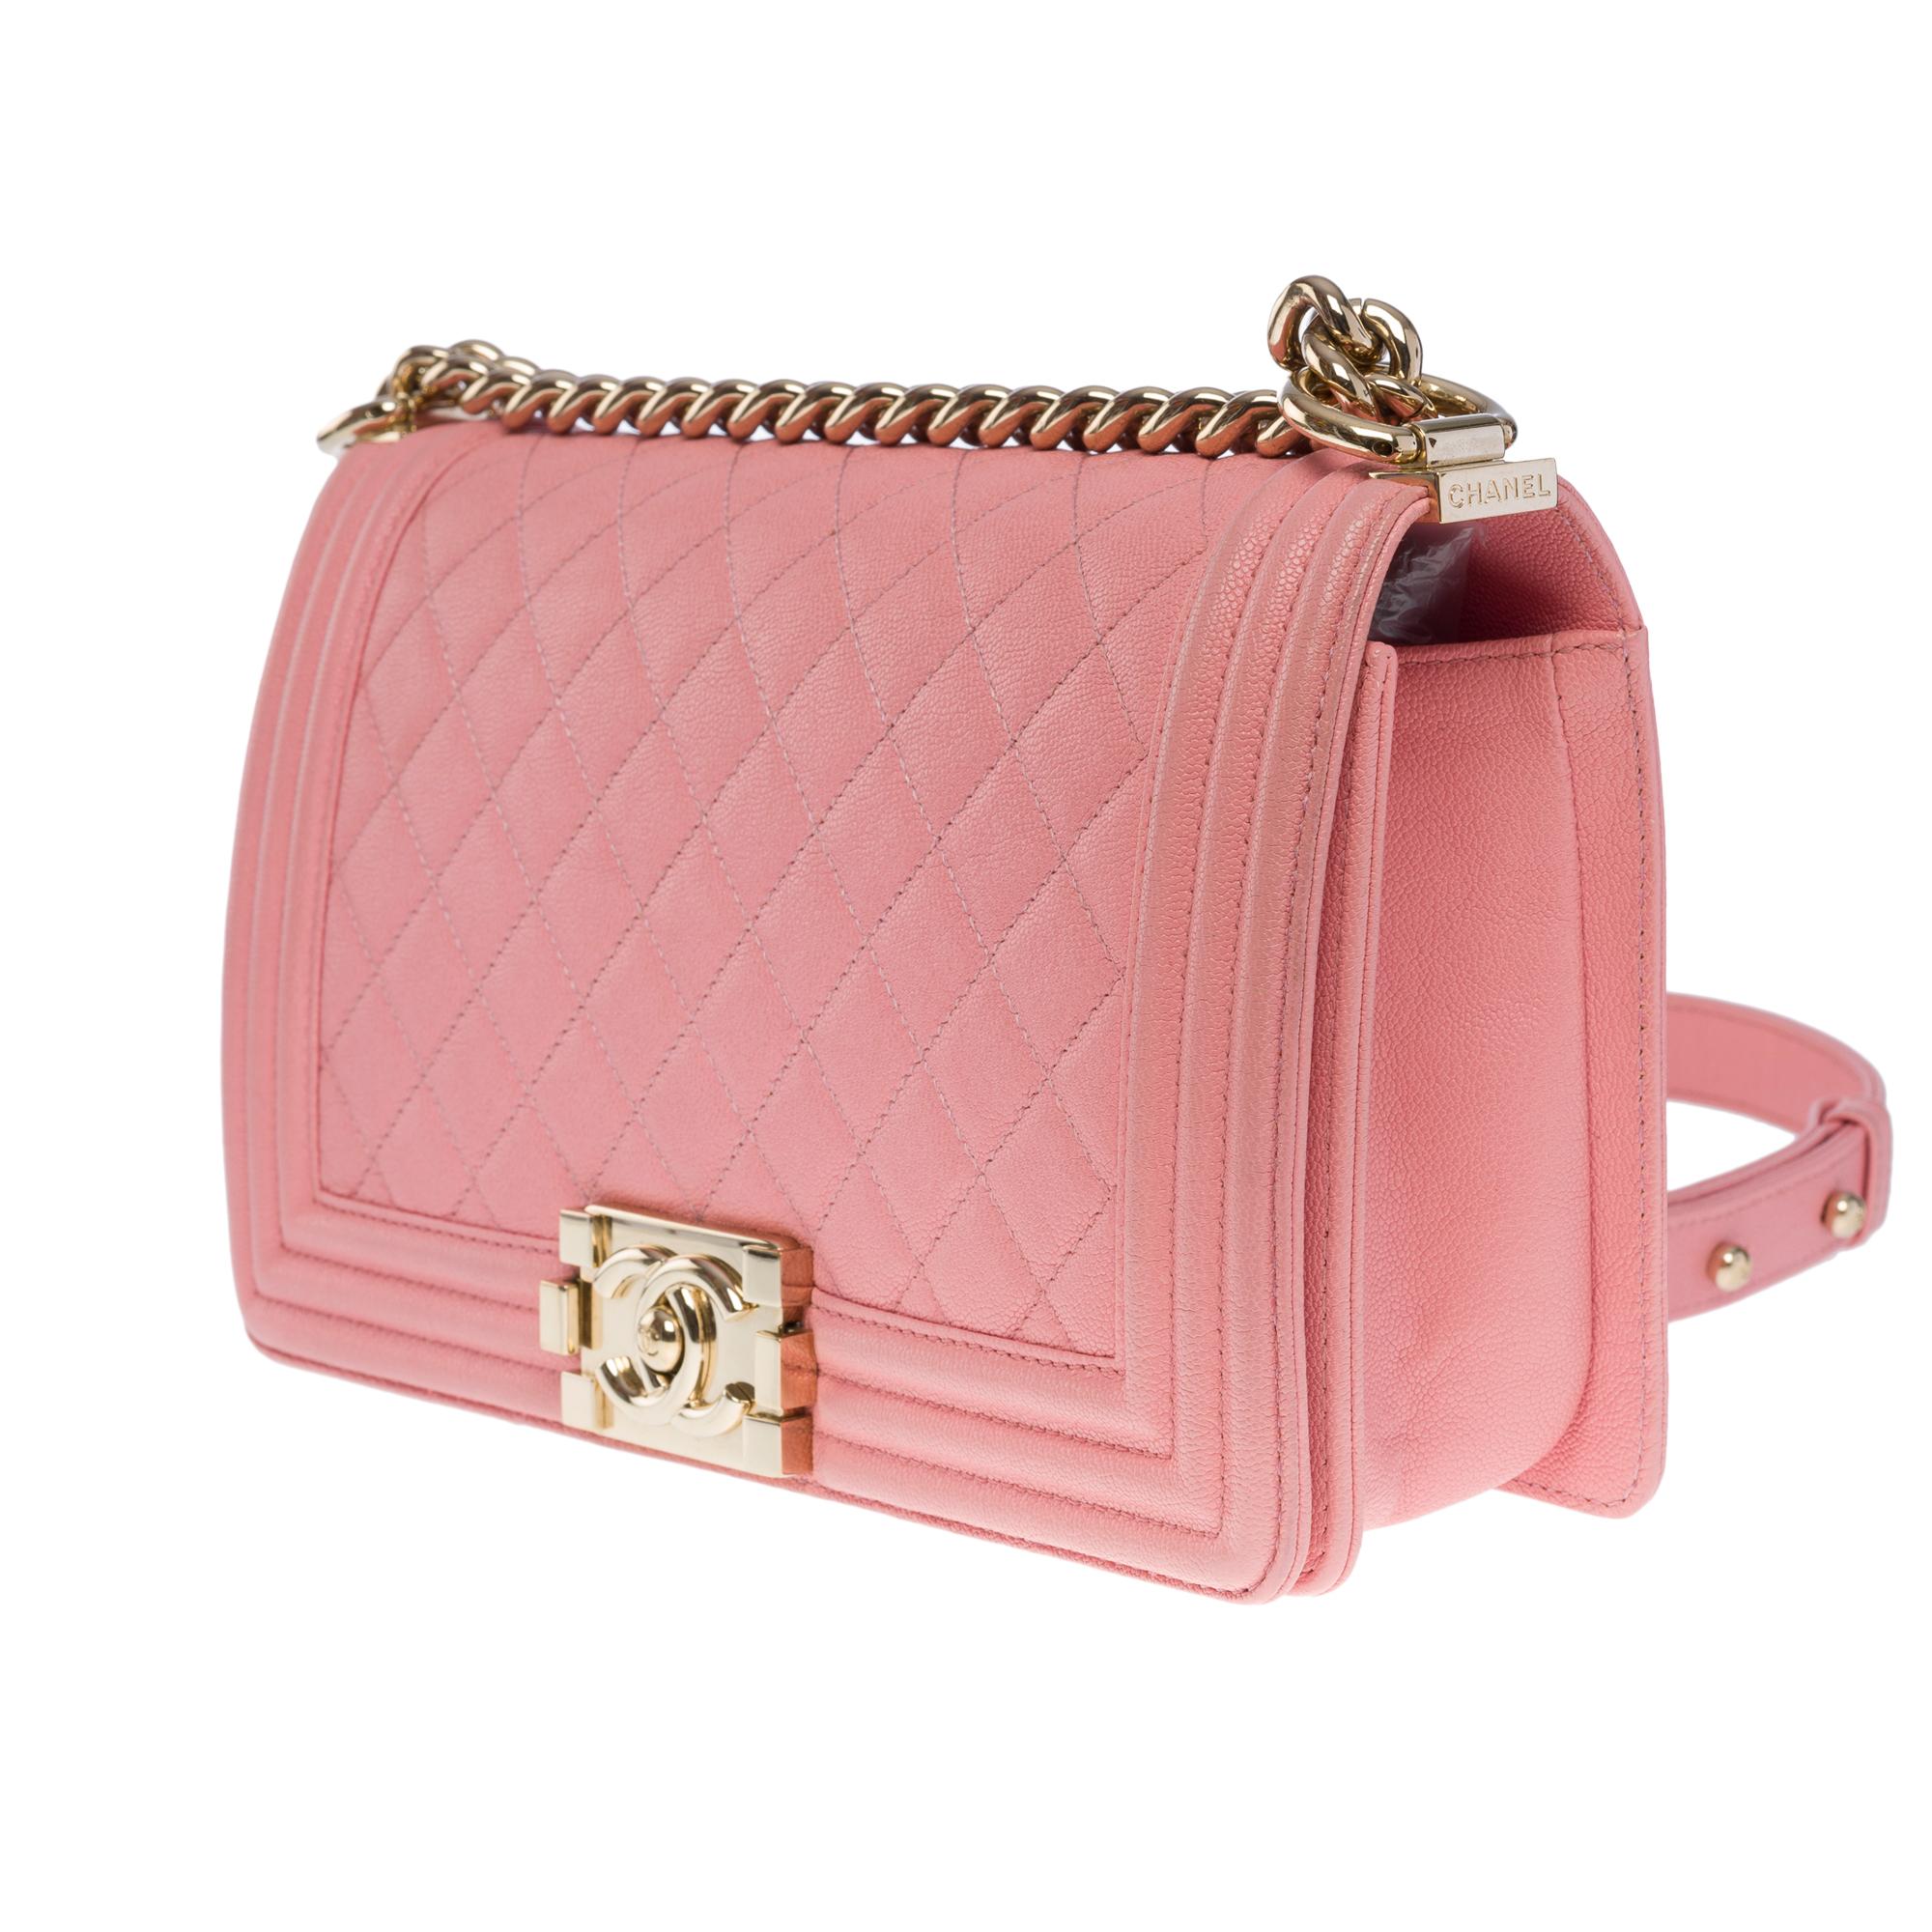 Women's Amazing Chanel Boy Old medium shoulder bag in Pink caviar quilted leather, SHW